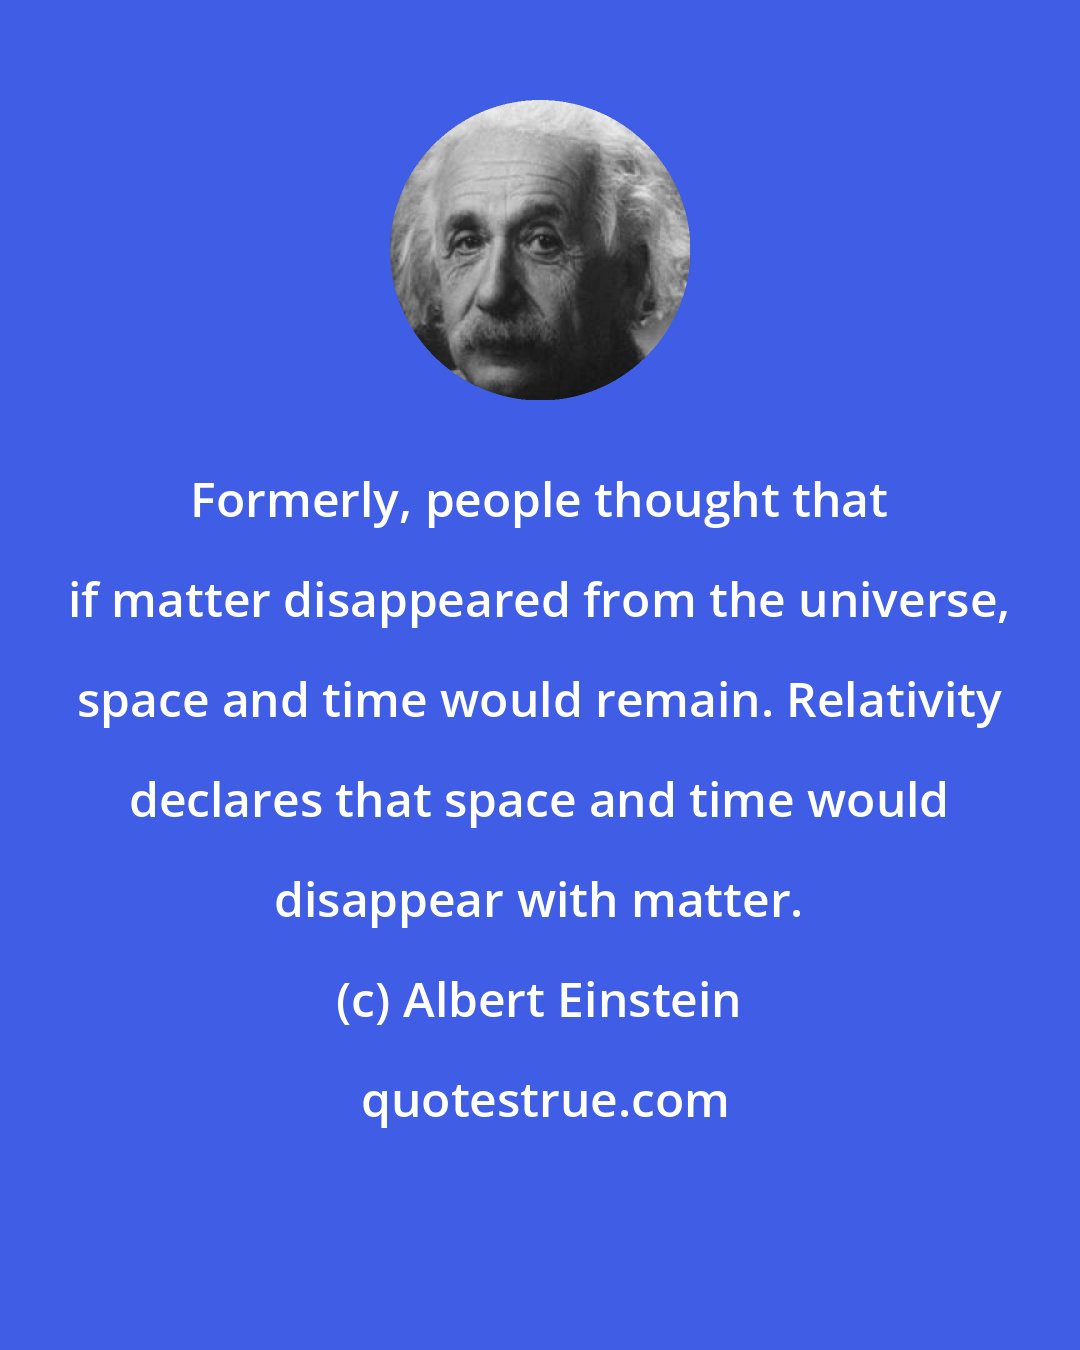 Albert Einstein: Formerly, people thought that if matter disappeared from the universe, space and time would remain. Relativity declares that space and time would disappear with matter.